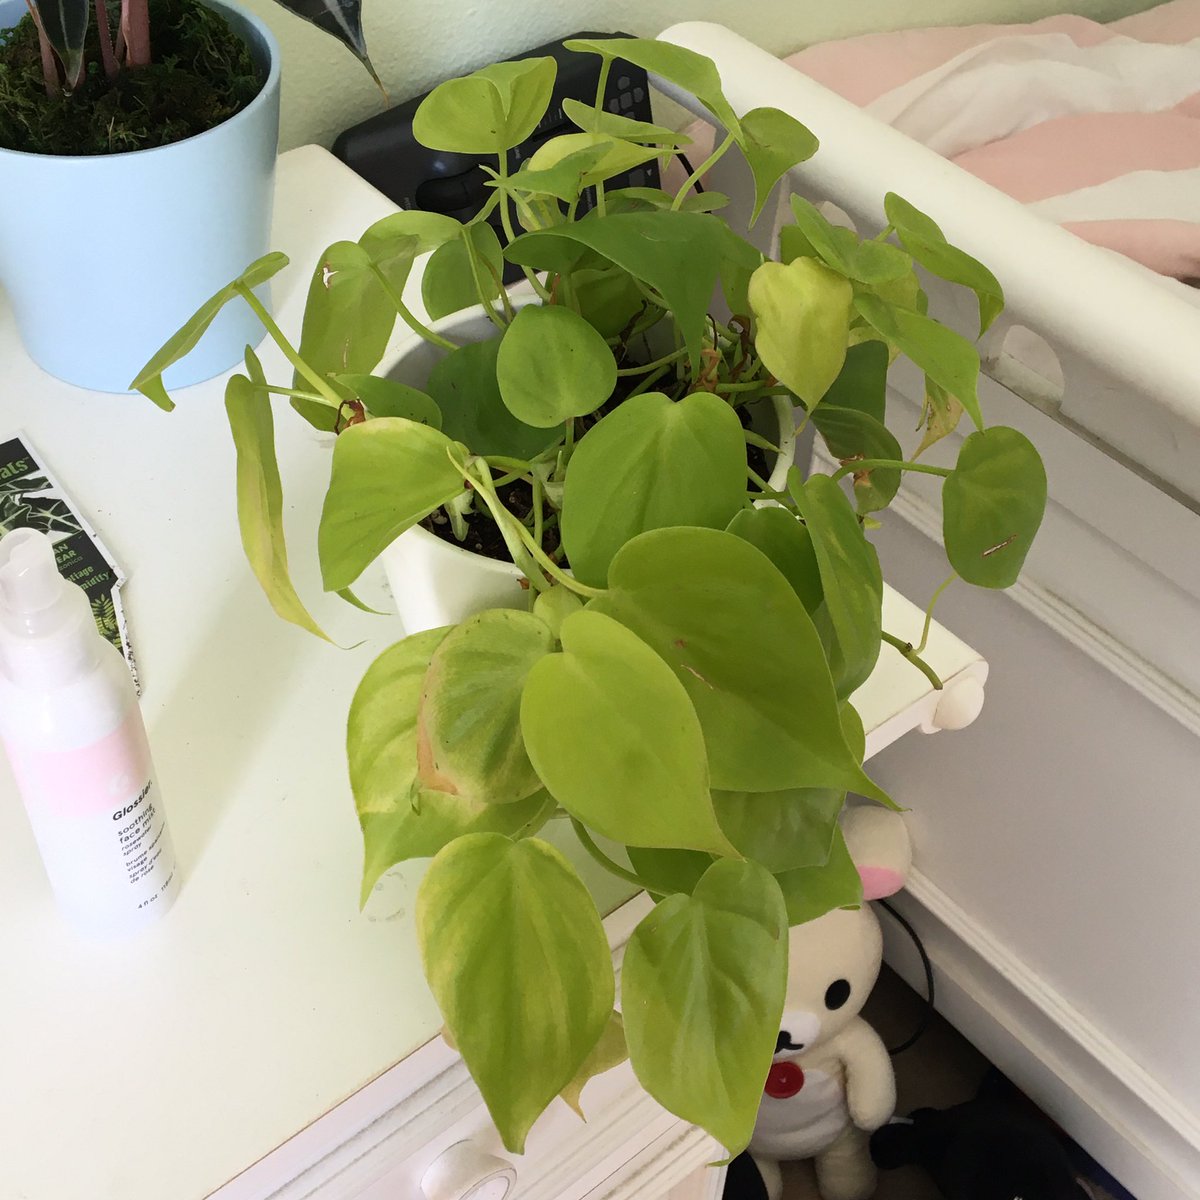 my other pothos.. neon something... it kind of took a beating too in the sun bc im a dumdum idiot but its starting to have growth now